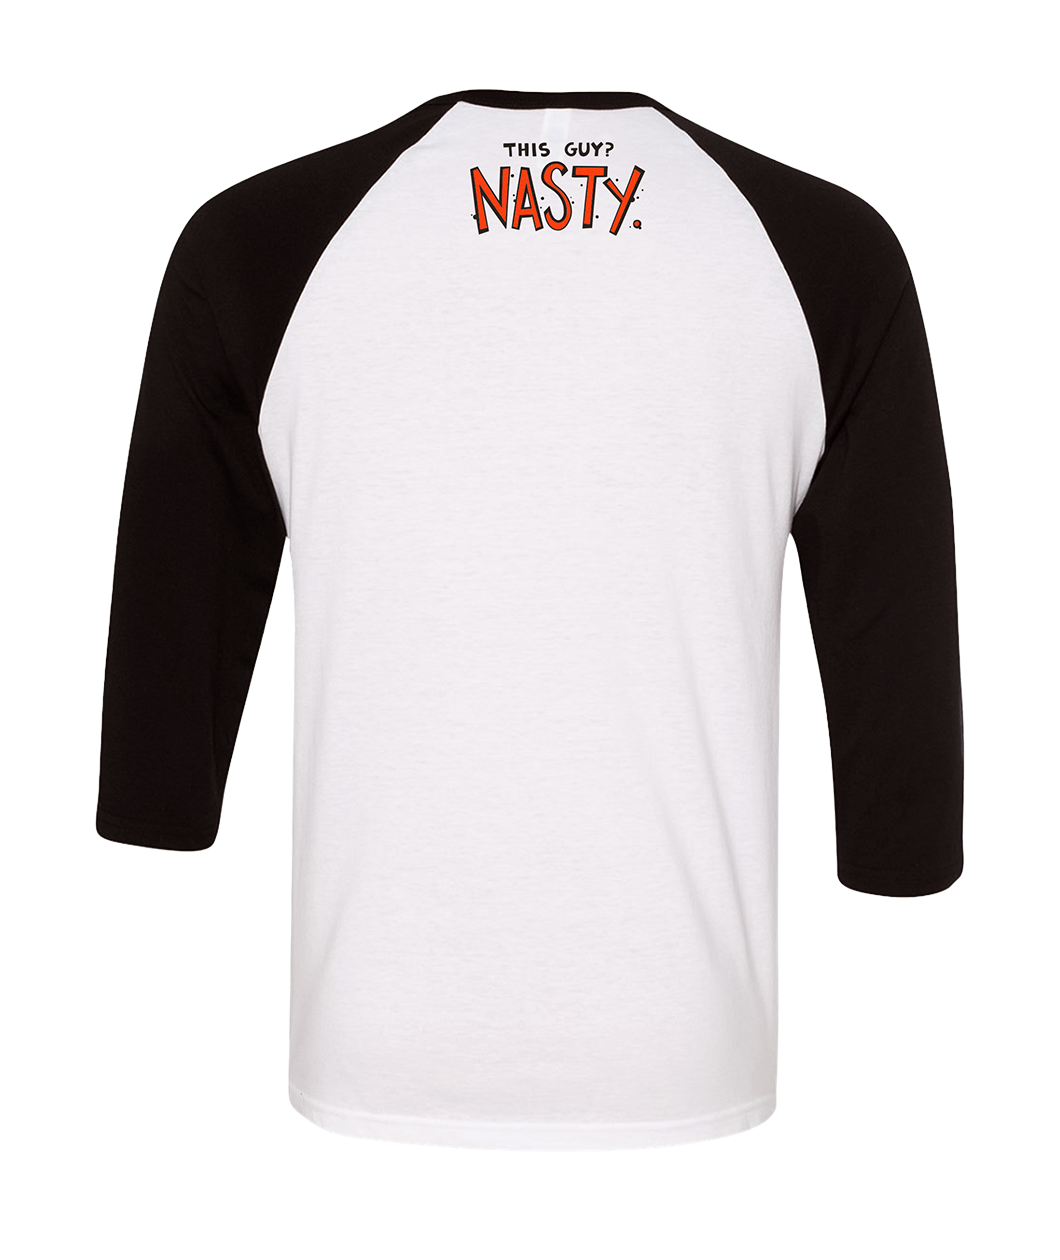 The back of the Drawfreaks baseball tee at the top of the shirt, says "This guy? Nasty.".